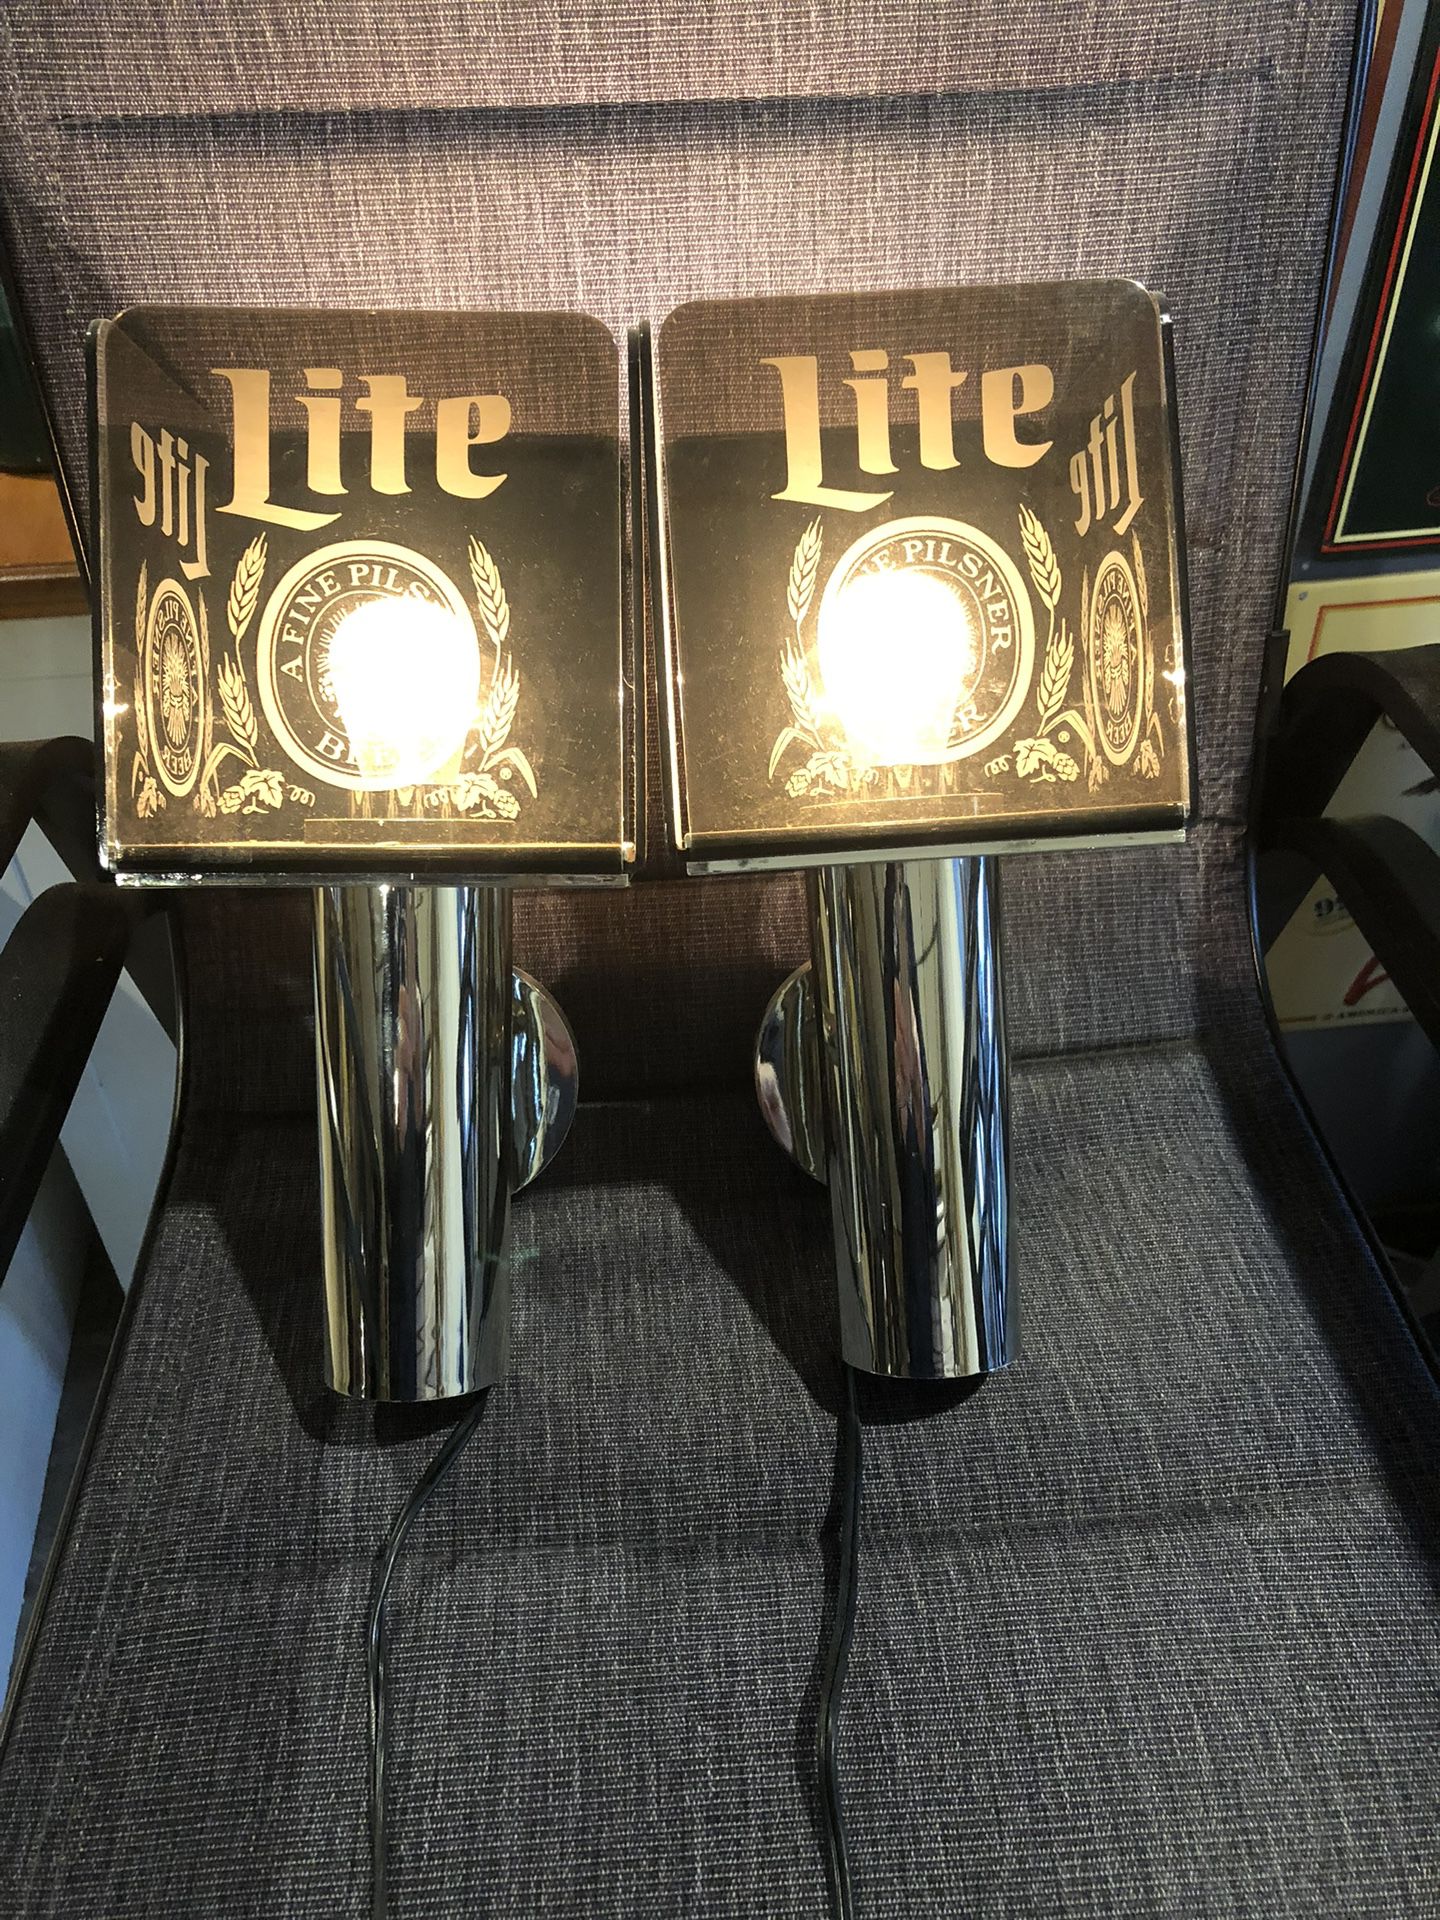 Miller Lite Wall Sconces Very Good Condition. Pickup Or Ship At Buyers Expense